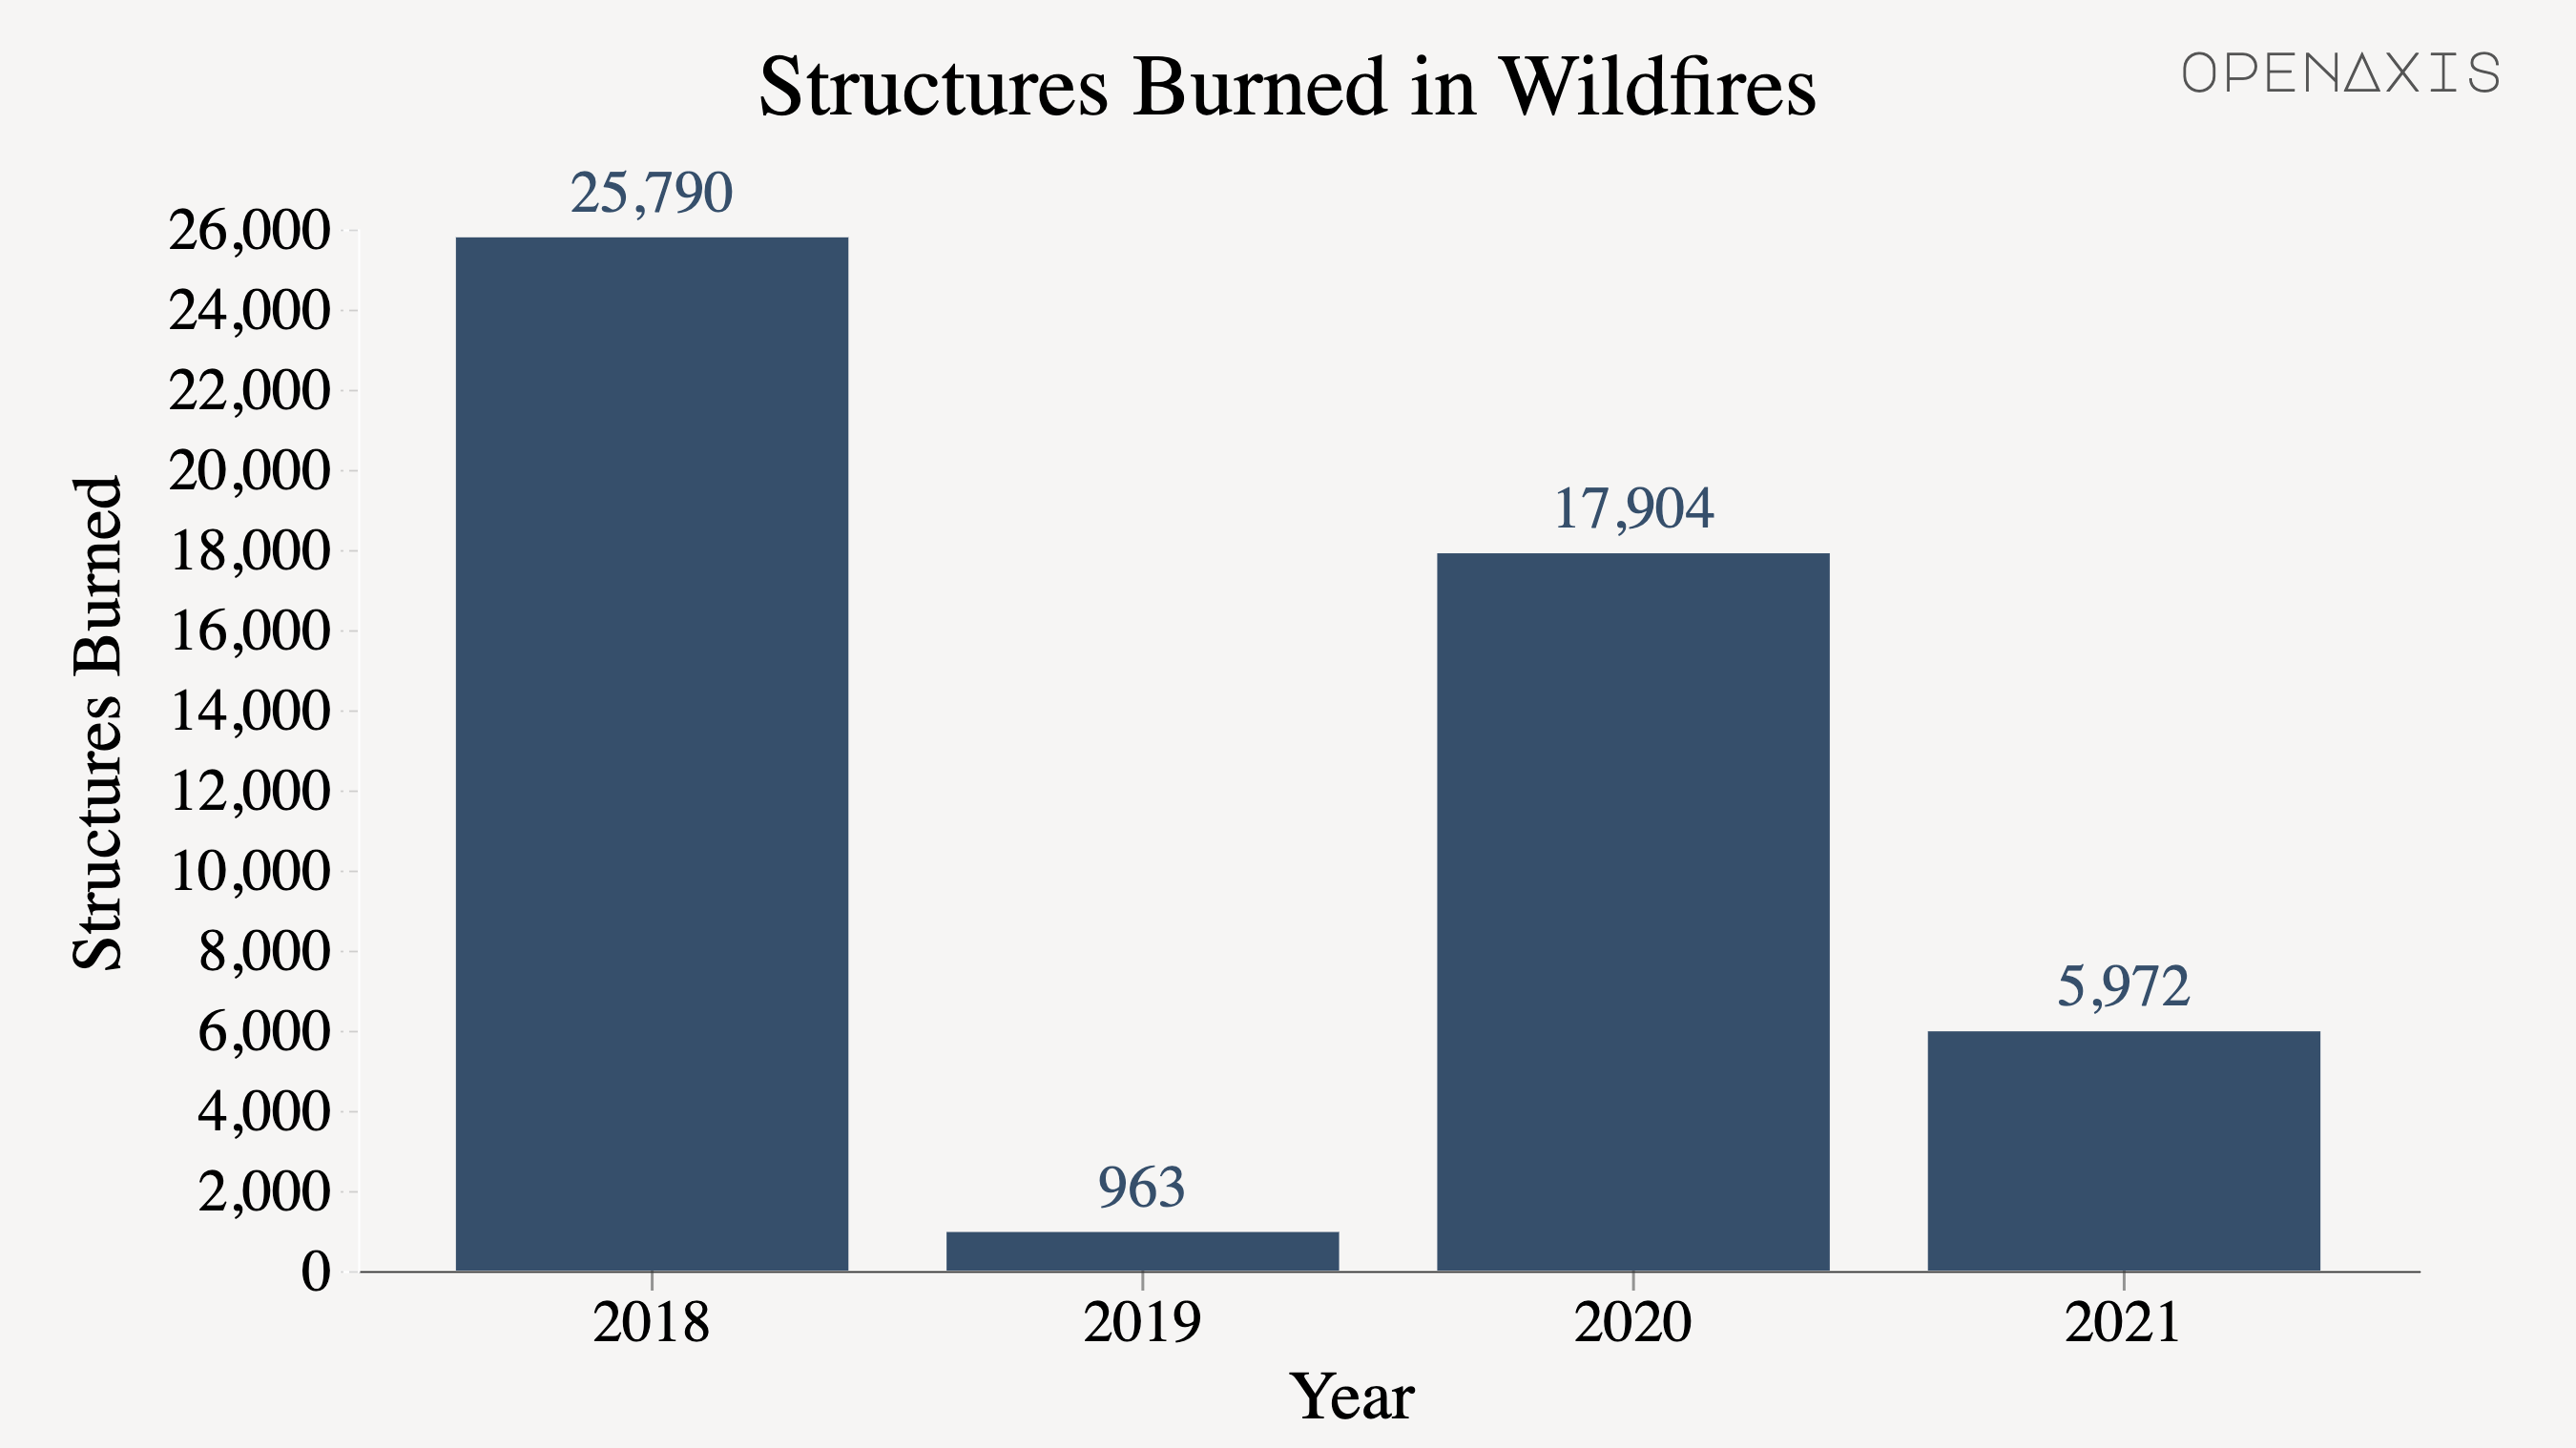 "Structures Burned in Wildfires"